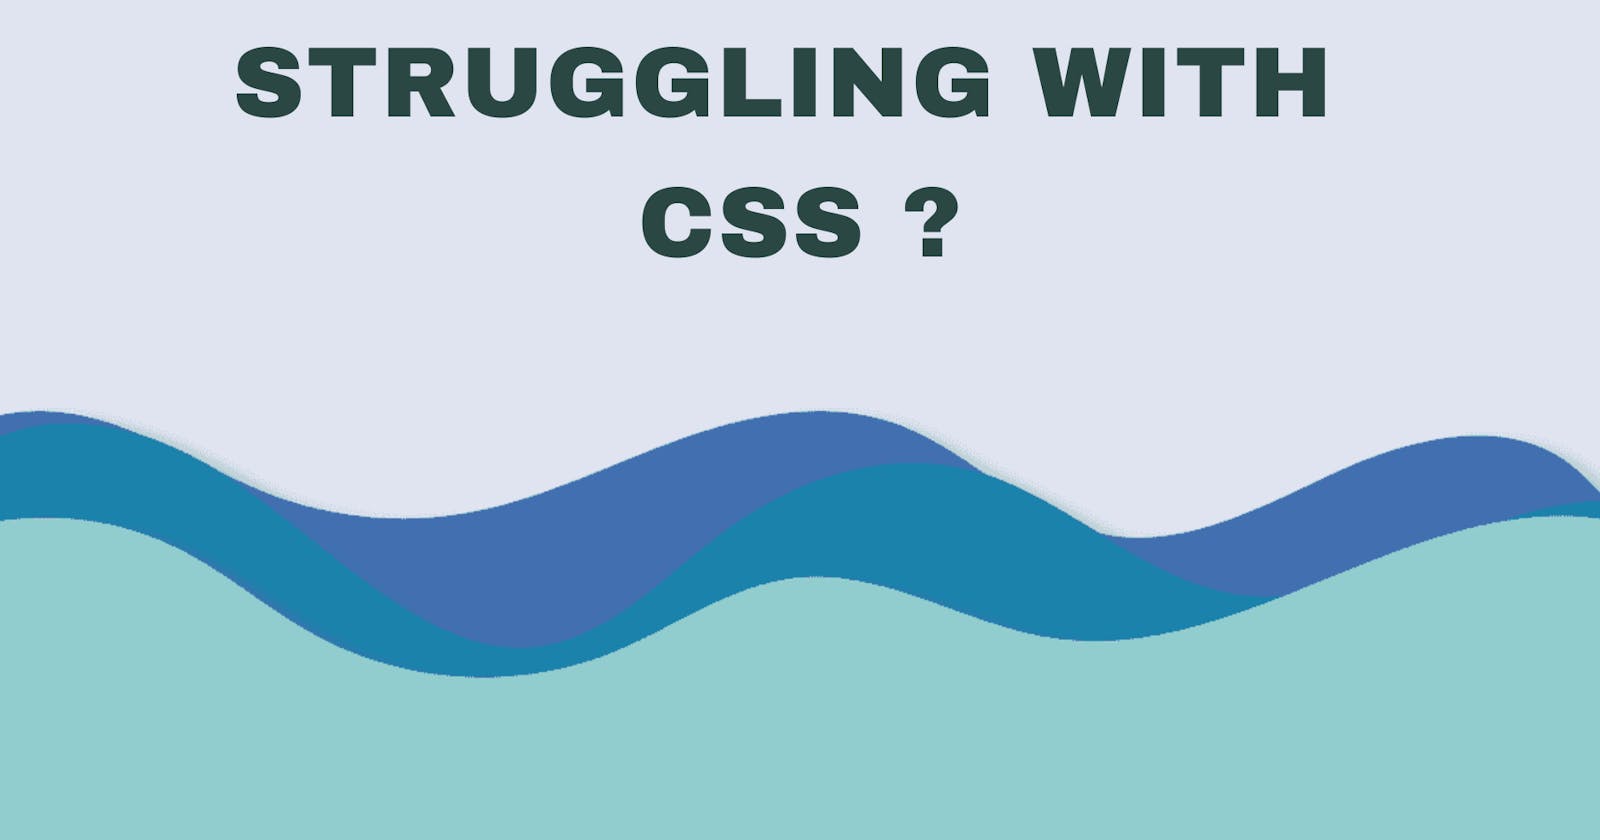 Are you Struggling with CSS?